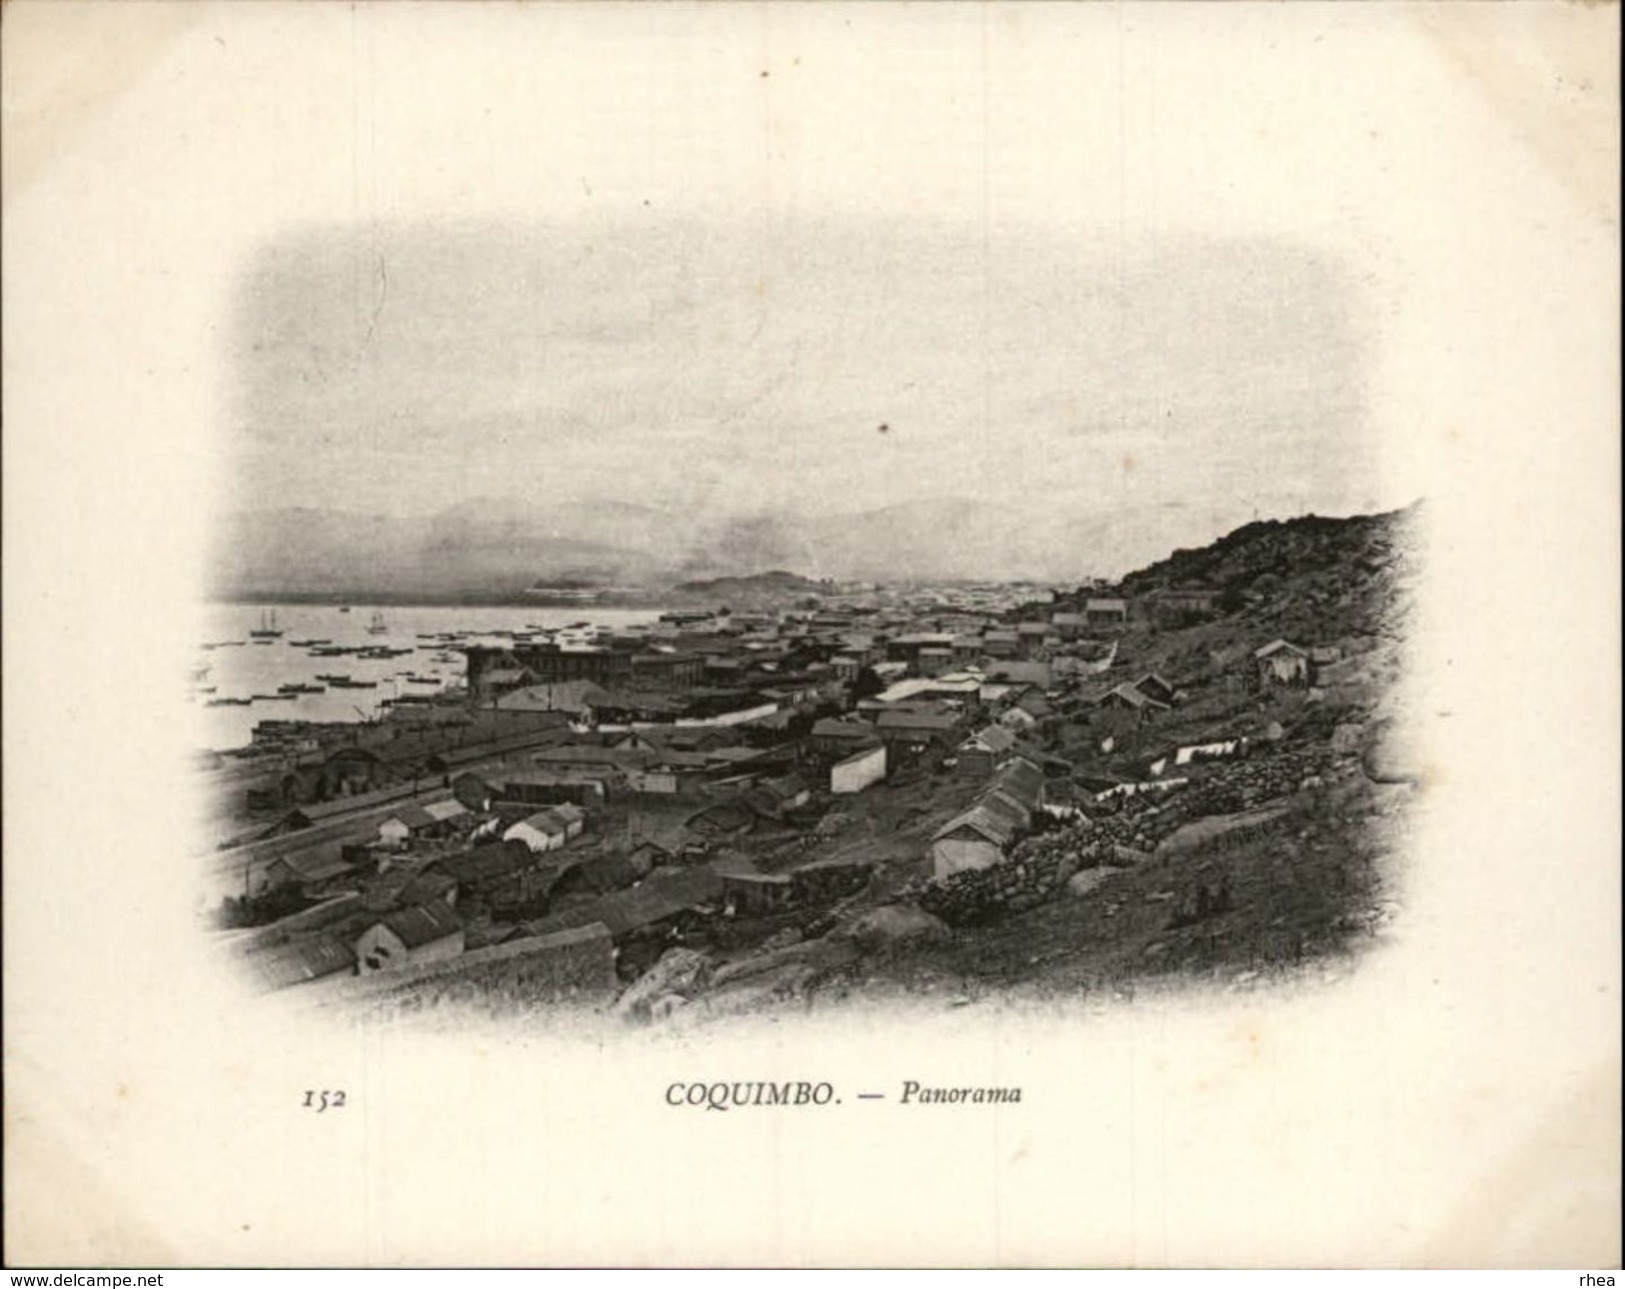 Campagne DUGUAY-TROUIN 1902-1903 - Voilier - Expédition - CHILI - COQUIMBO - Chile